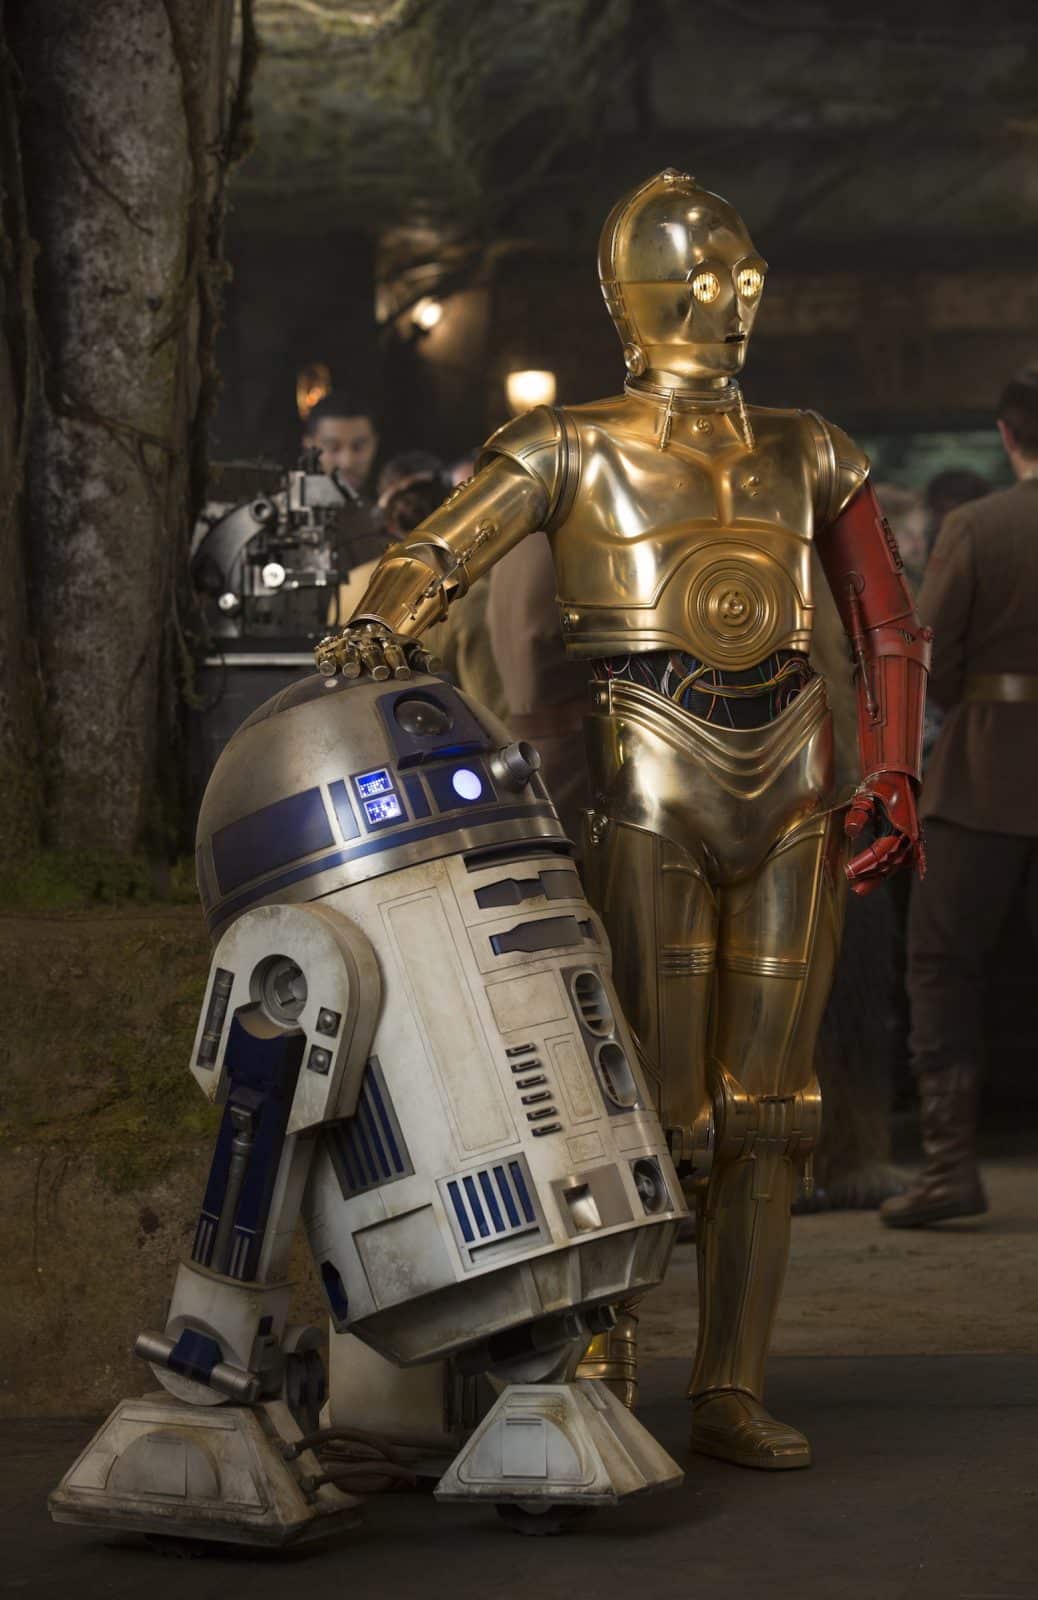 Star Wars VII The Force Awakens 9 - C-3PO with Red Arm and R2-D2